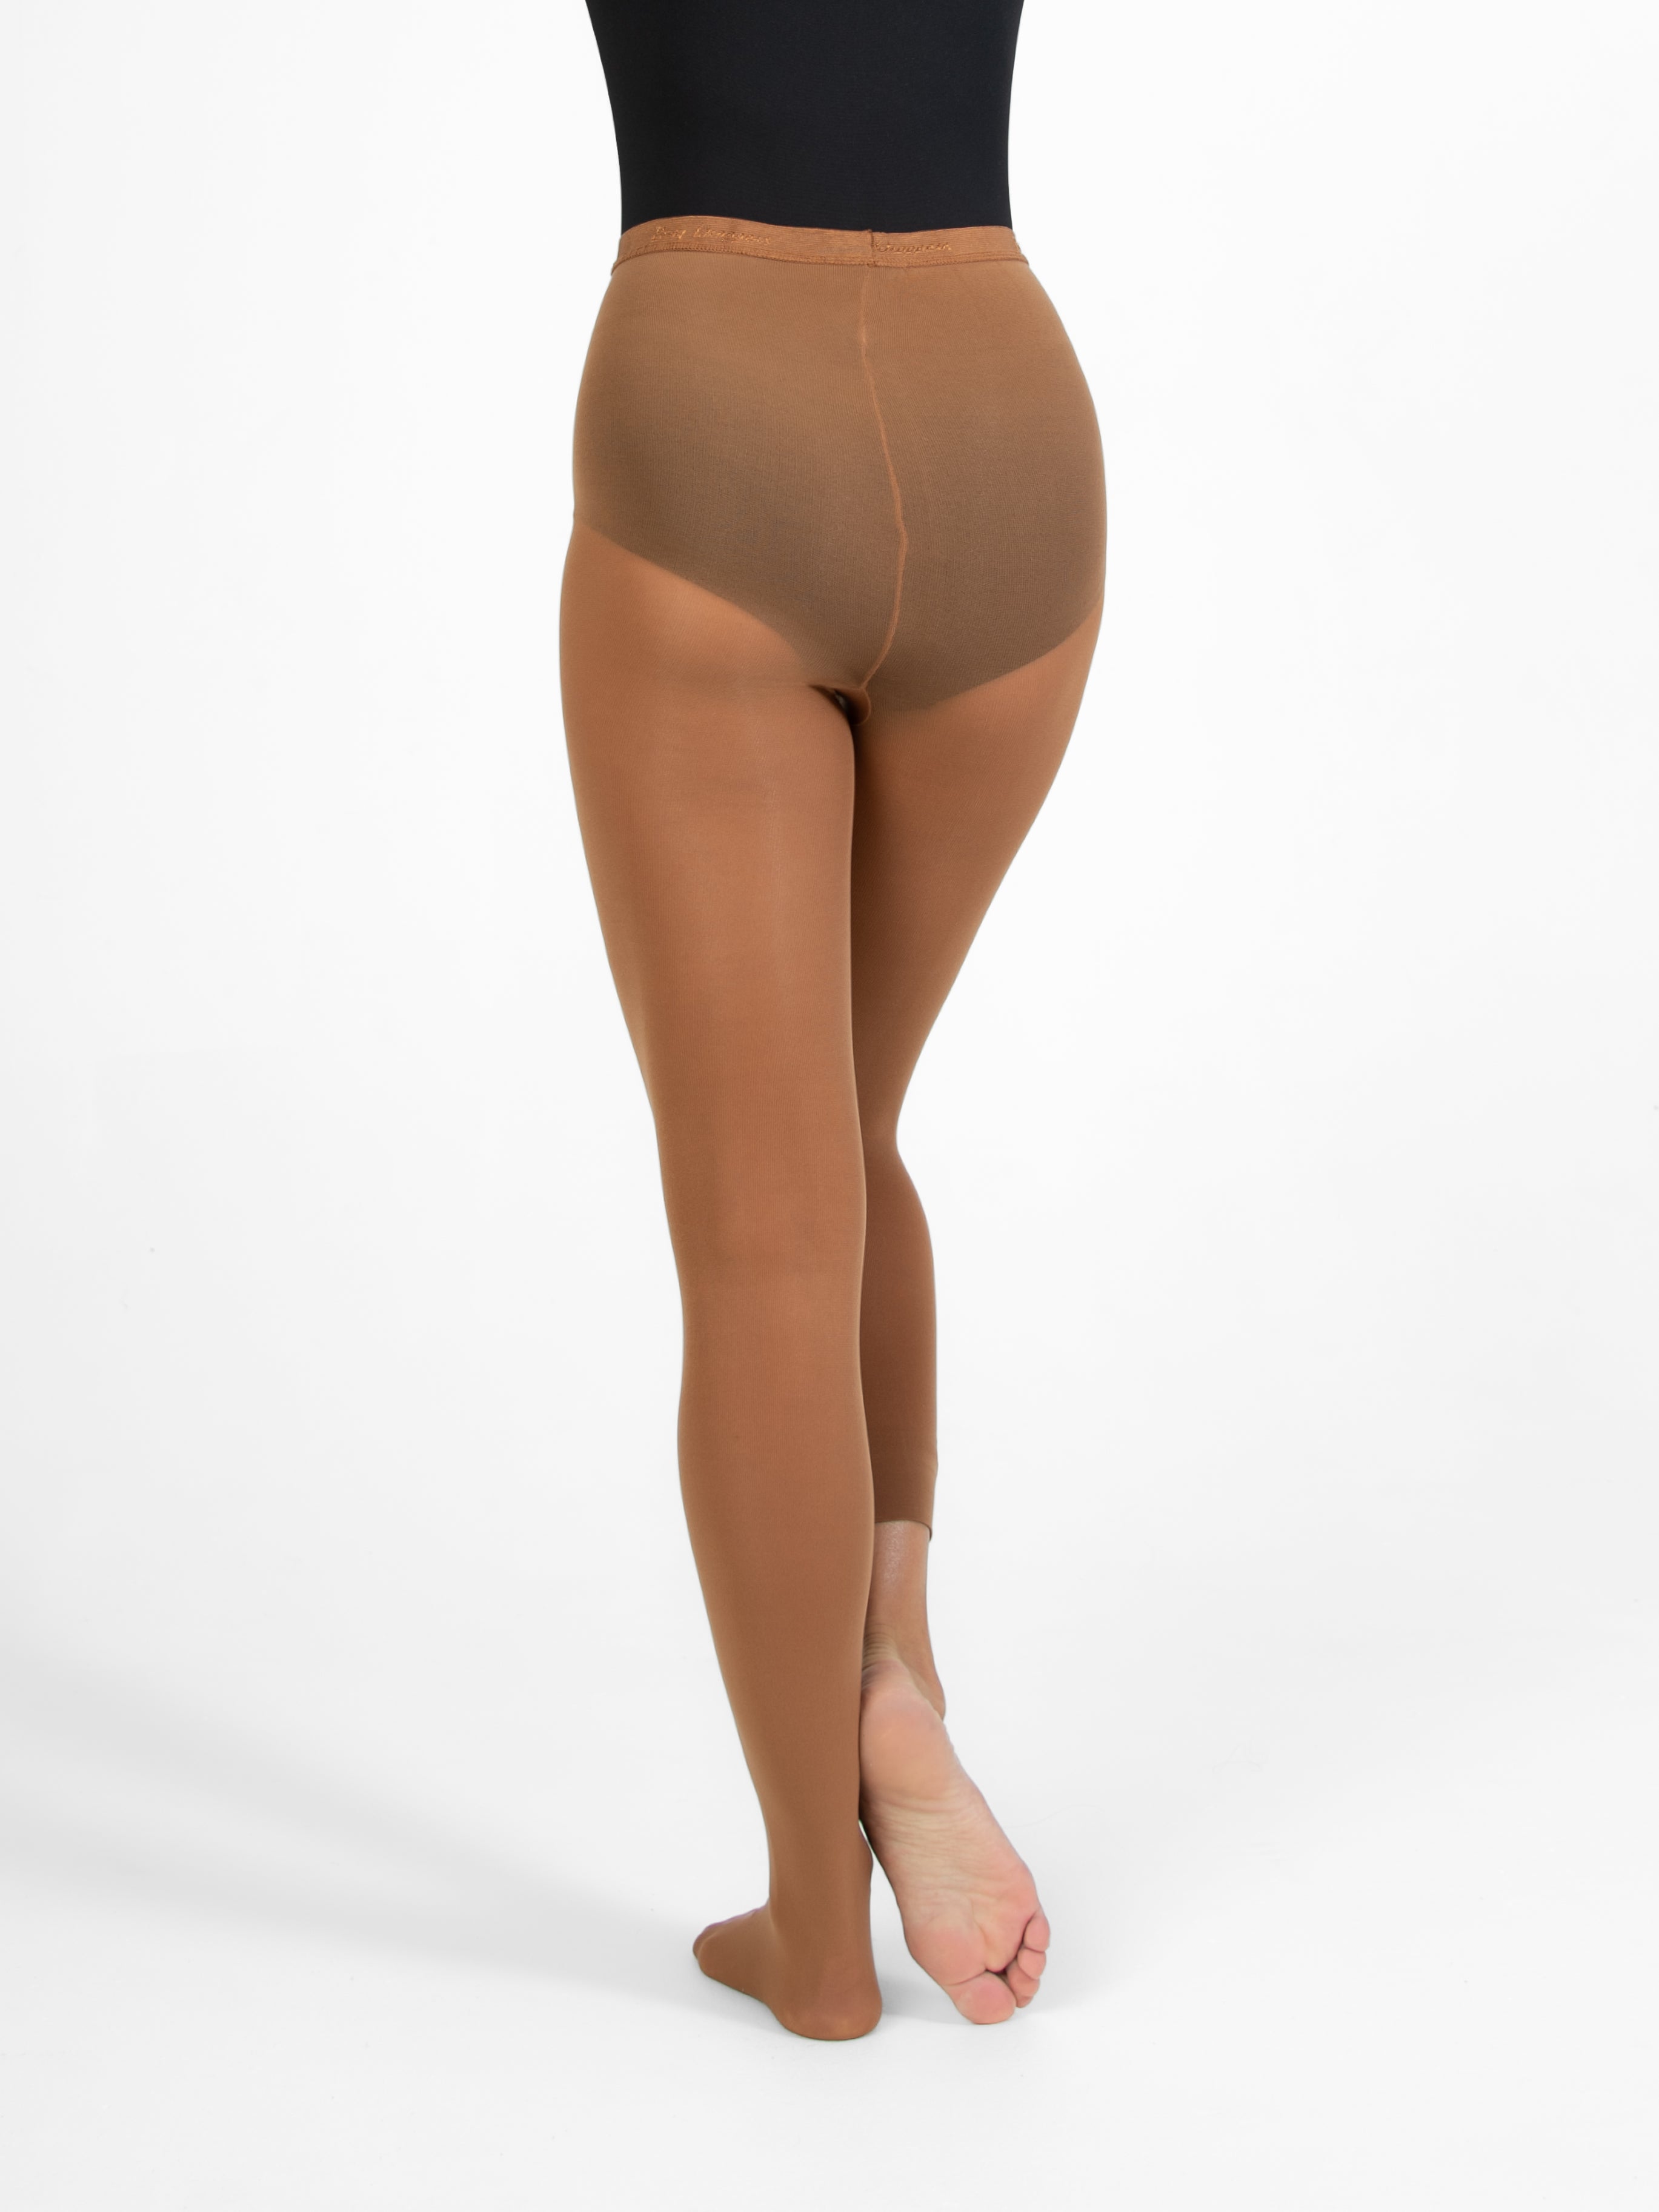 Body Wrappers C33 Girls Total Stretch Footless Tights (Medium/Large - Jazzy  Tan)